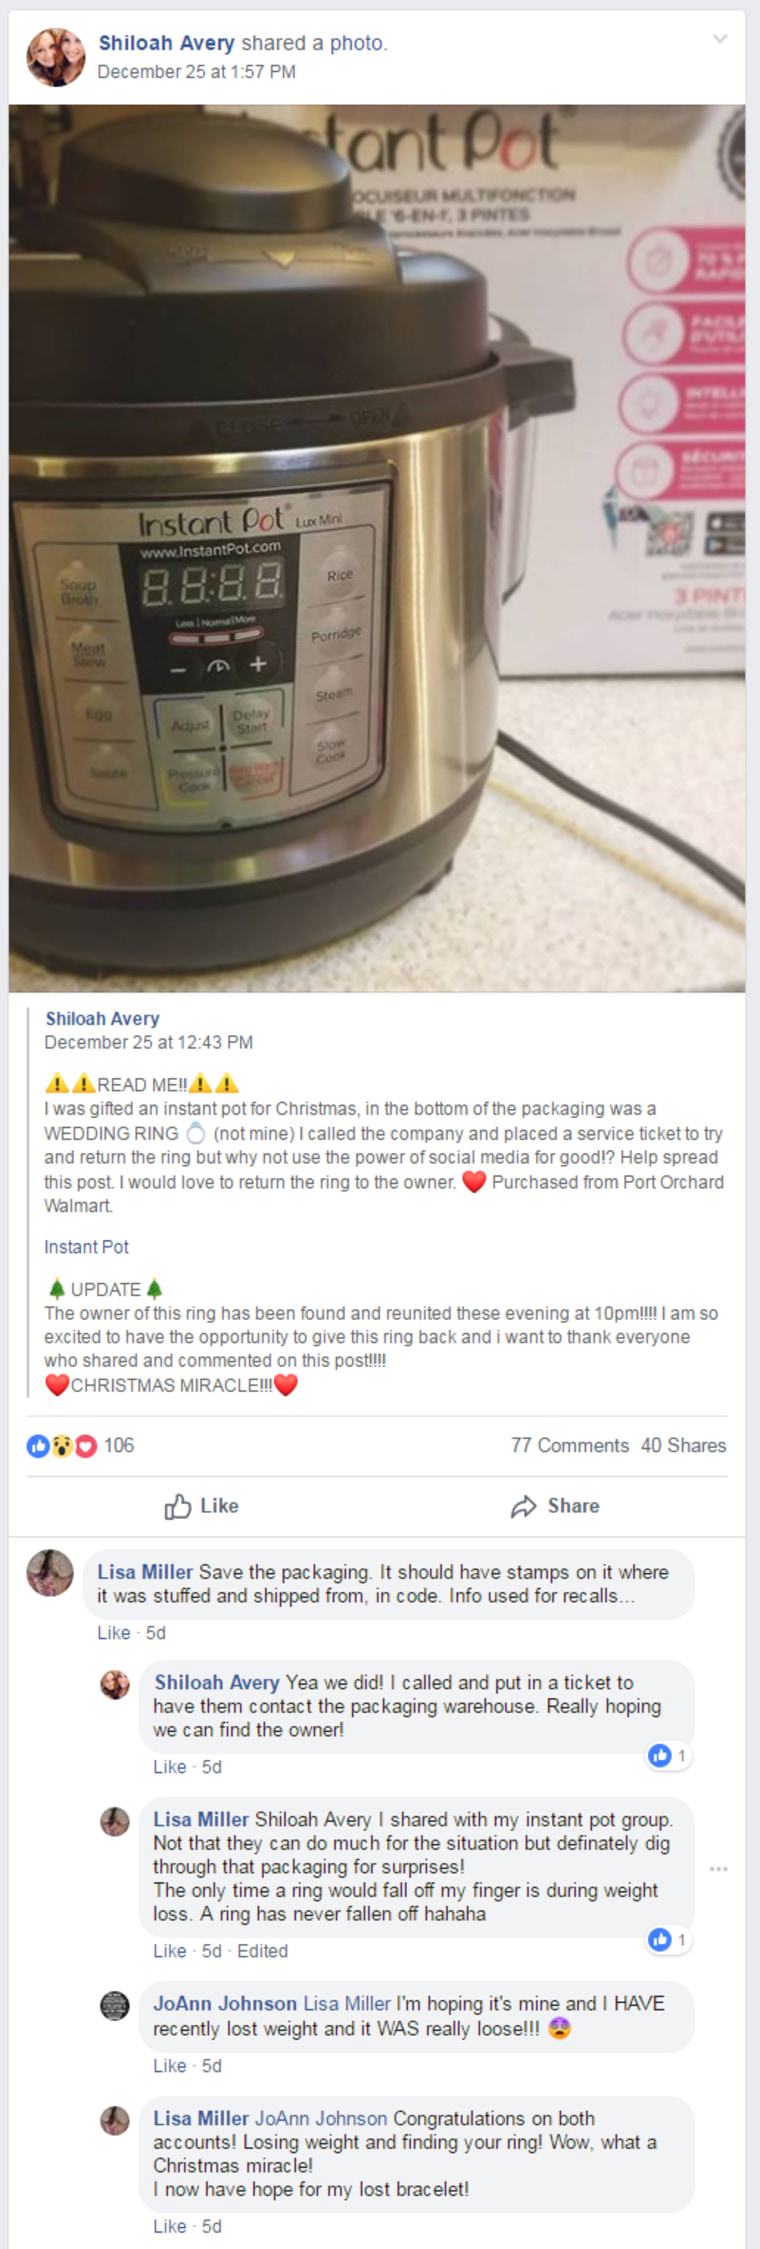 Woman finds wedding ring in Instant Pot box and returns it to rightful owner